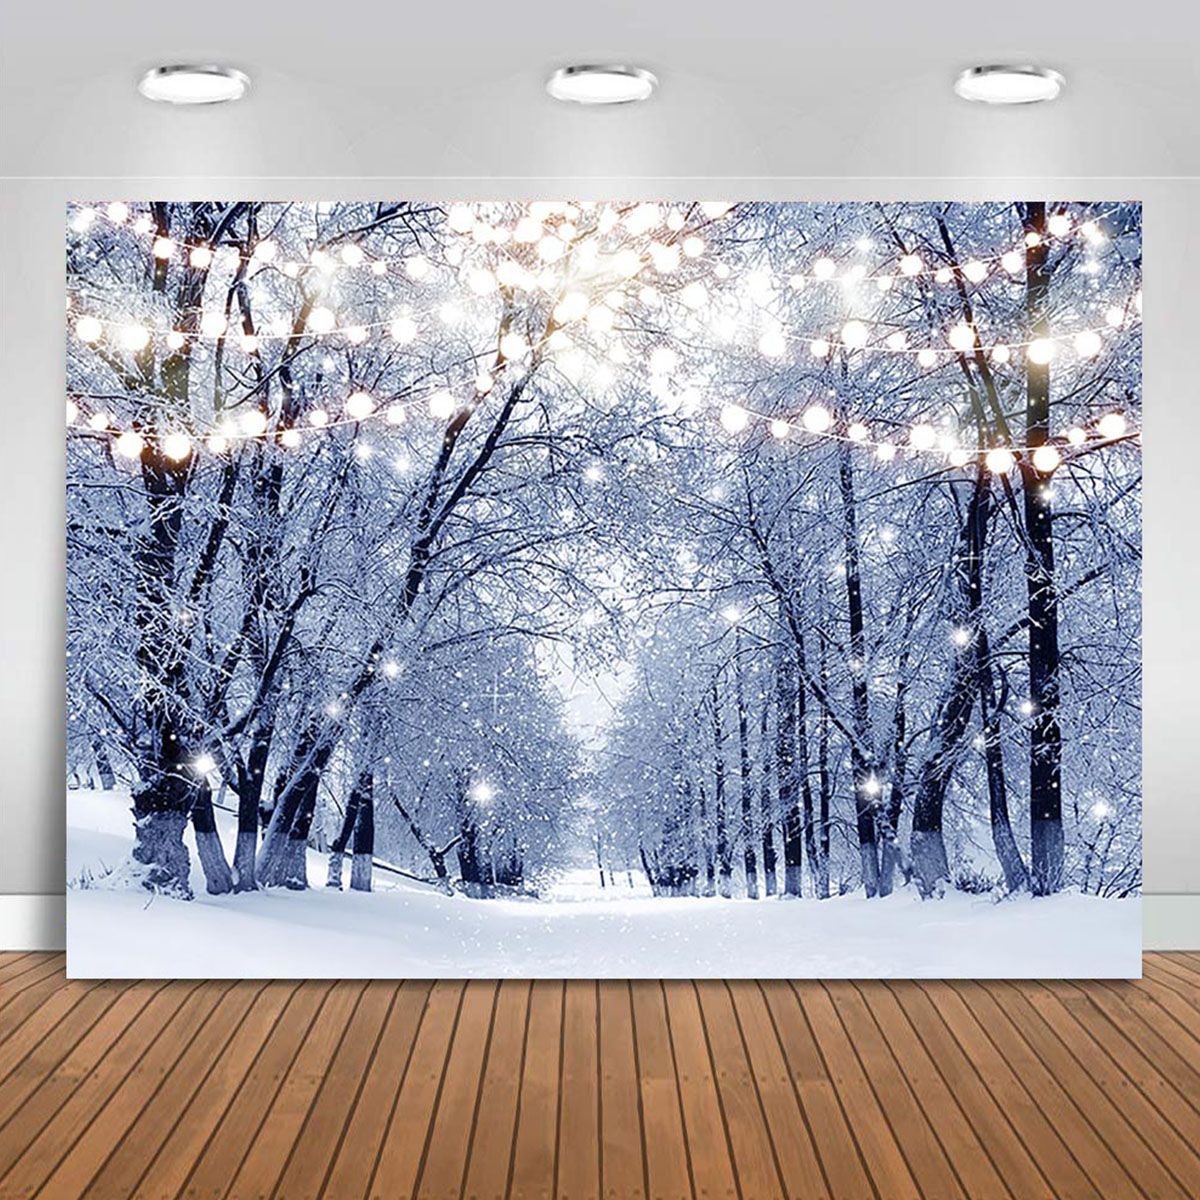 5x3FT-7x5FT-8x6FT-Light-Strip-Winter-Snow-Forest-Street-Photography-Backdrop-Background-Studio-Prop-1609475